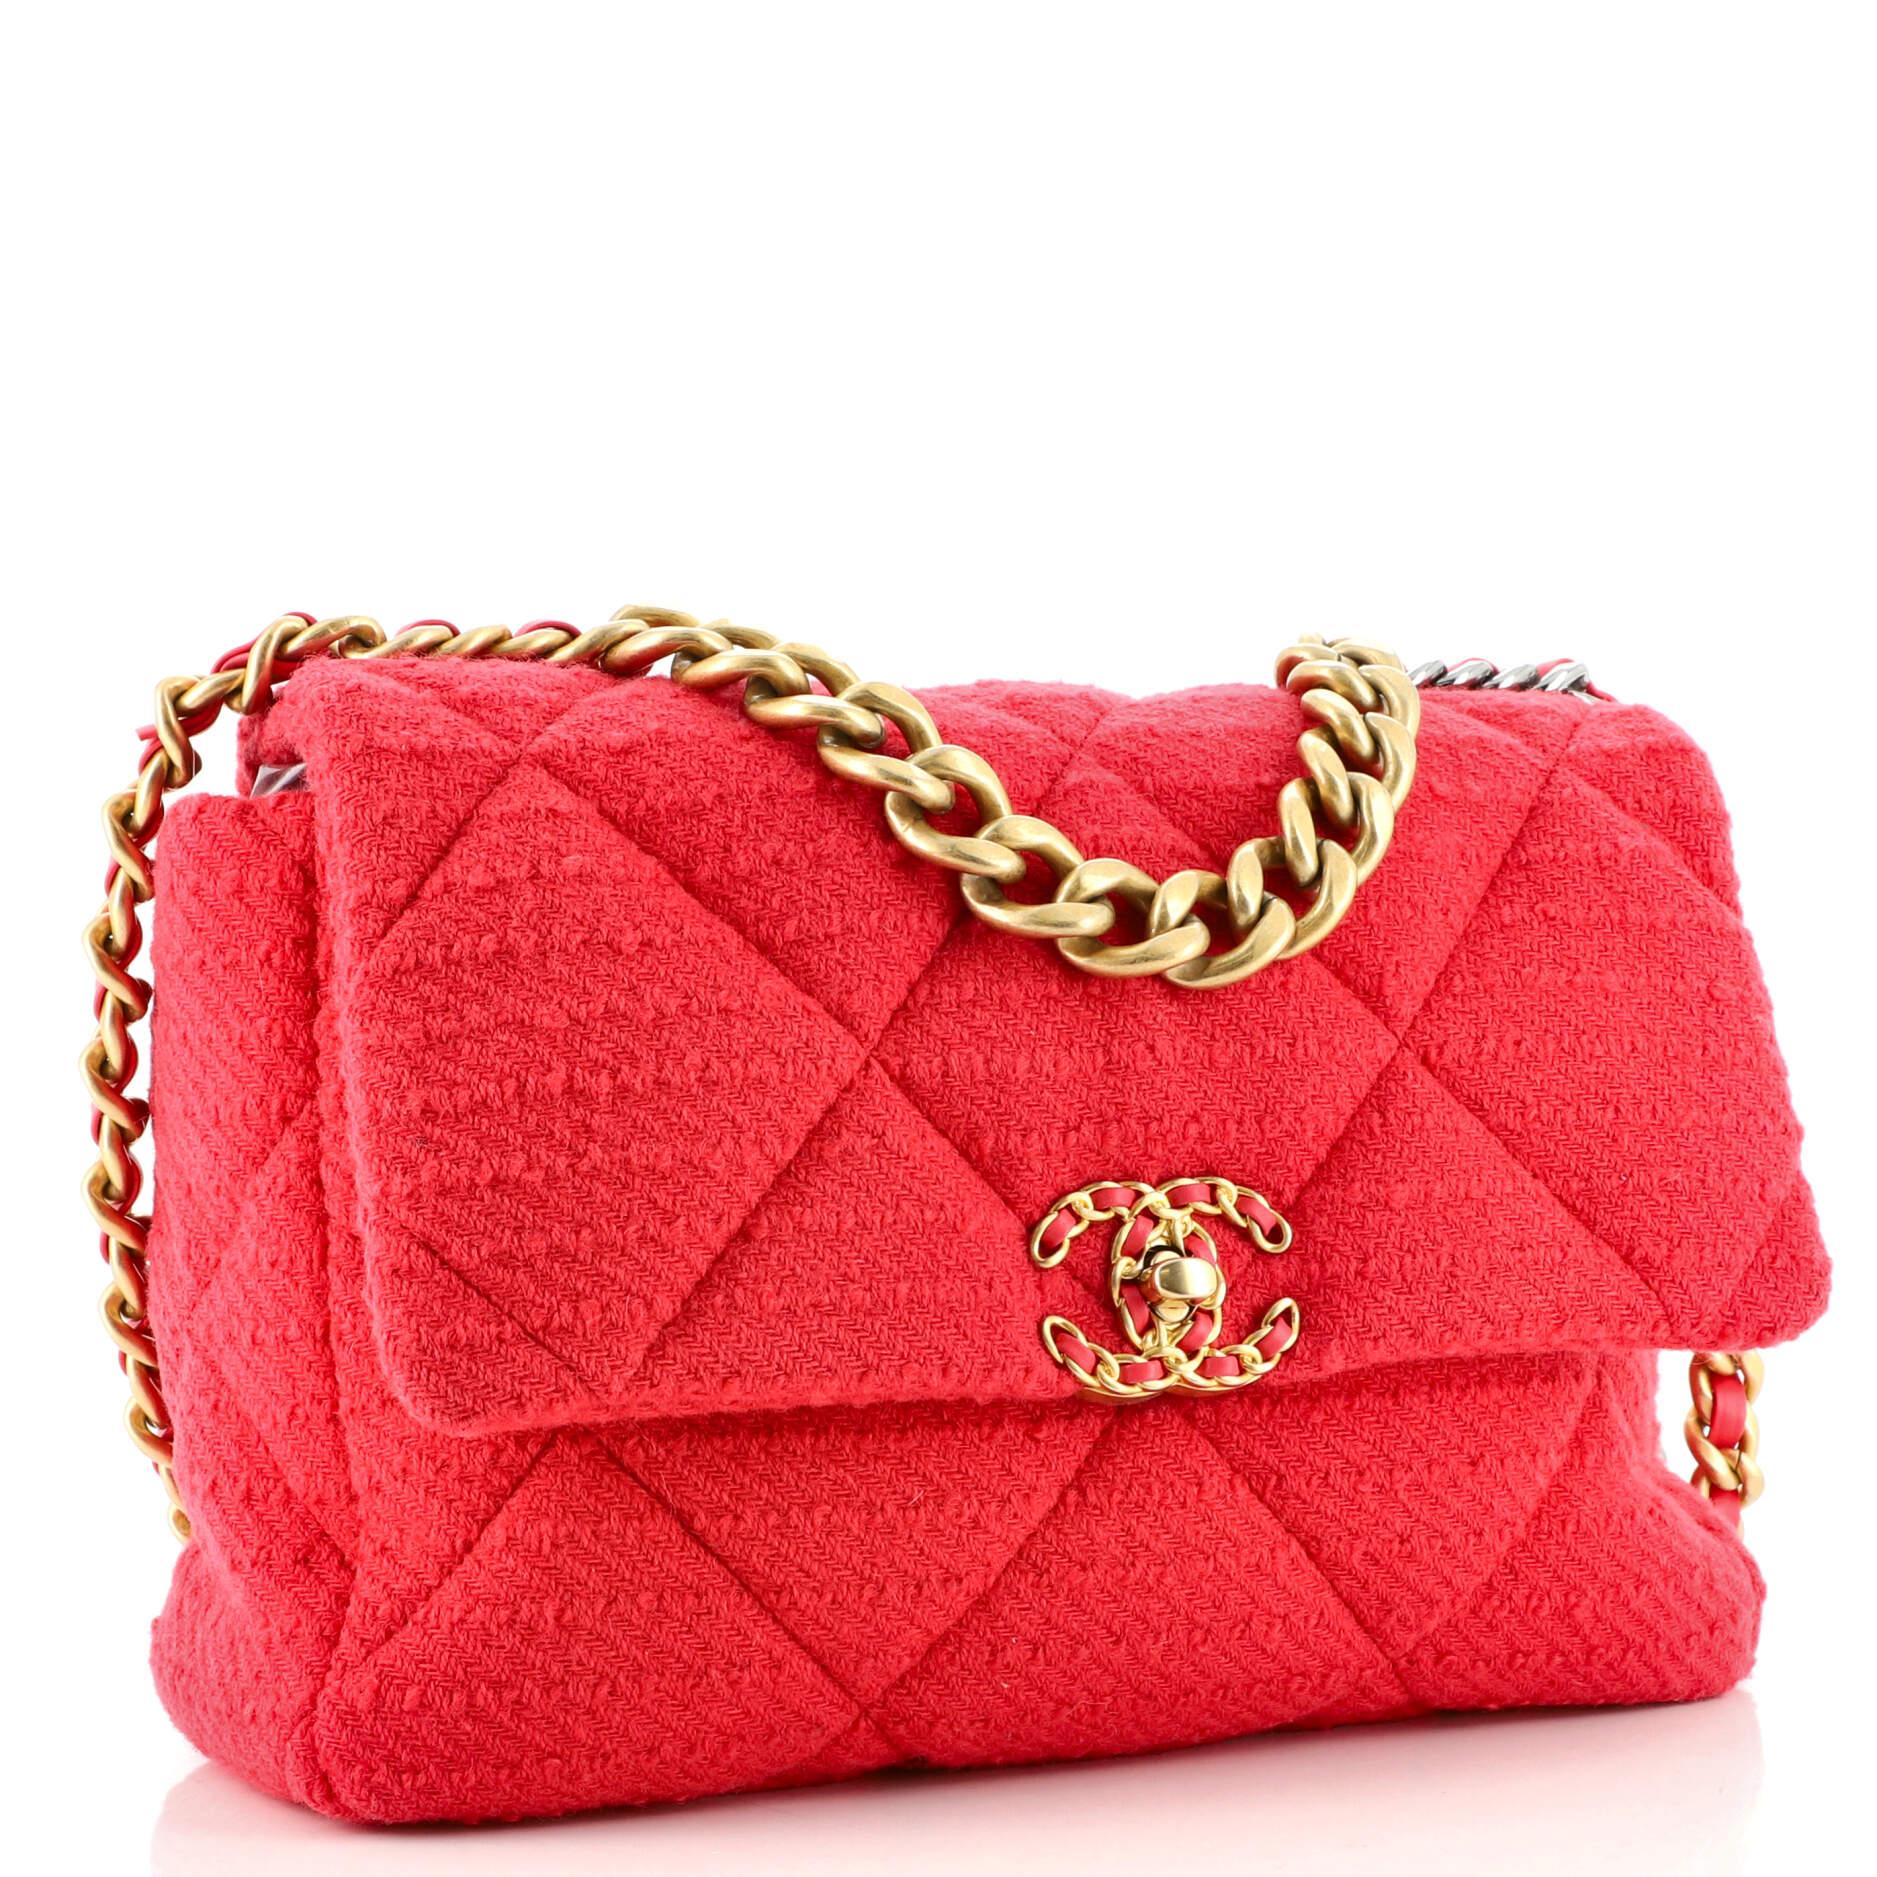 chanel 19 red bag